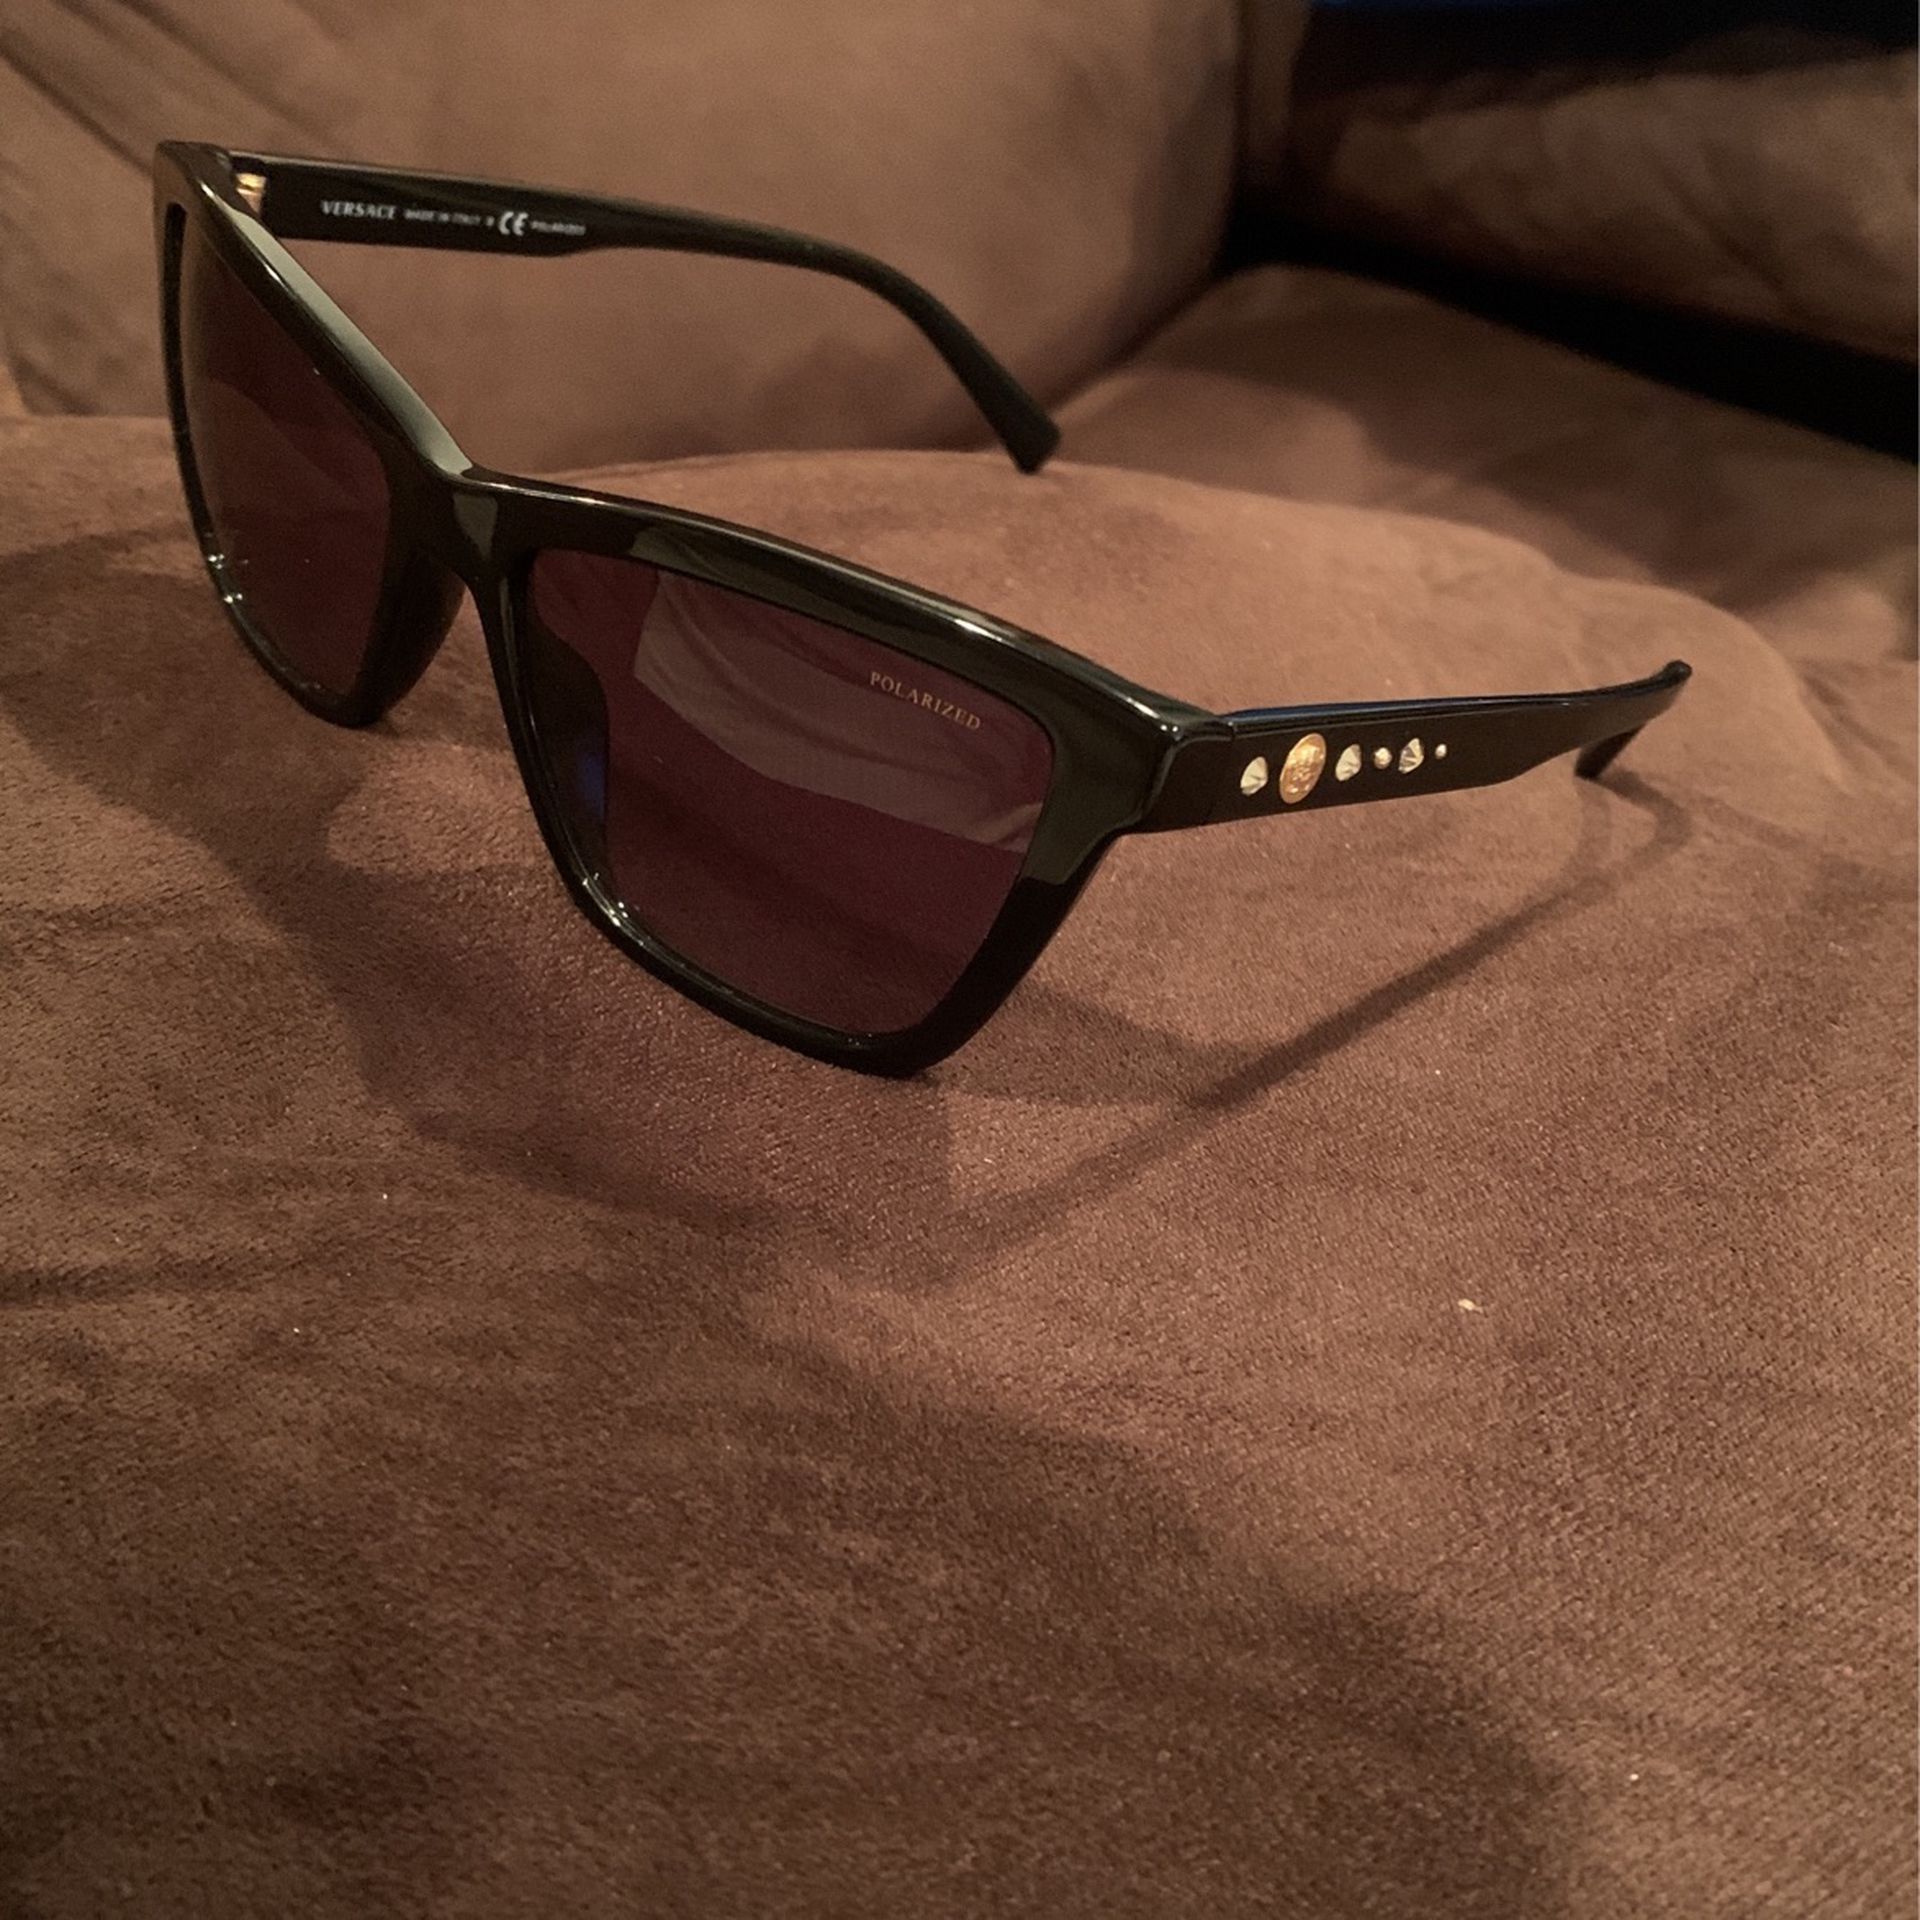 Authentic Black Women’s Versace Glasses; Cat Eye Frame; Price Negotiable; No Scratches Or Smudges